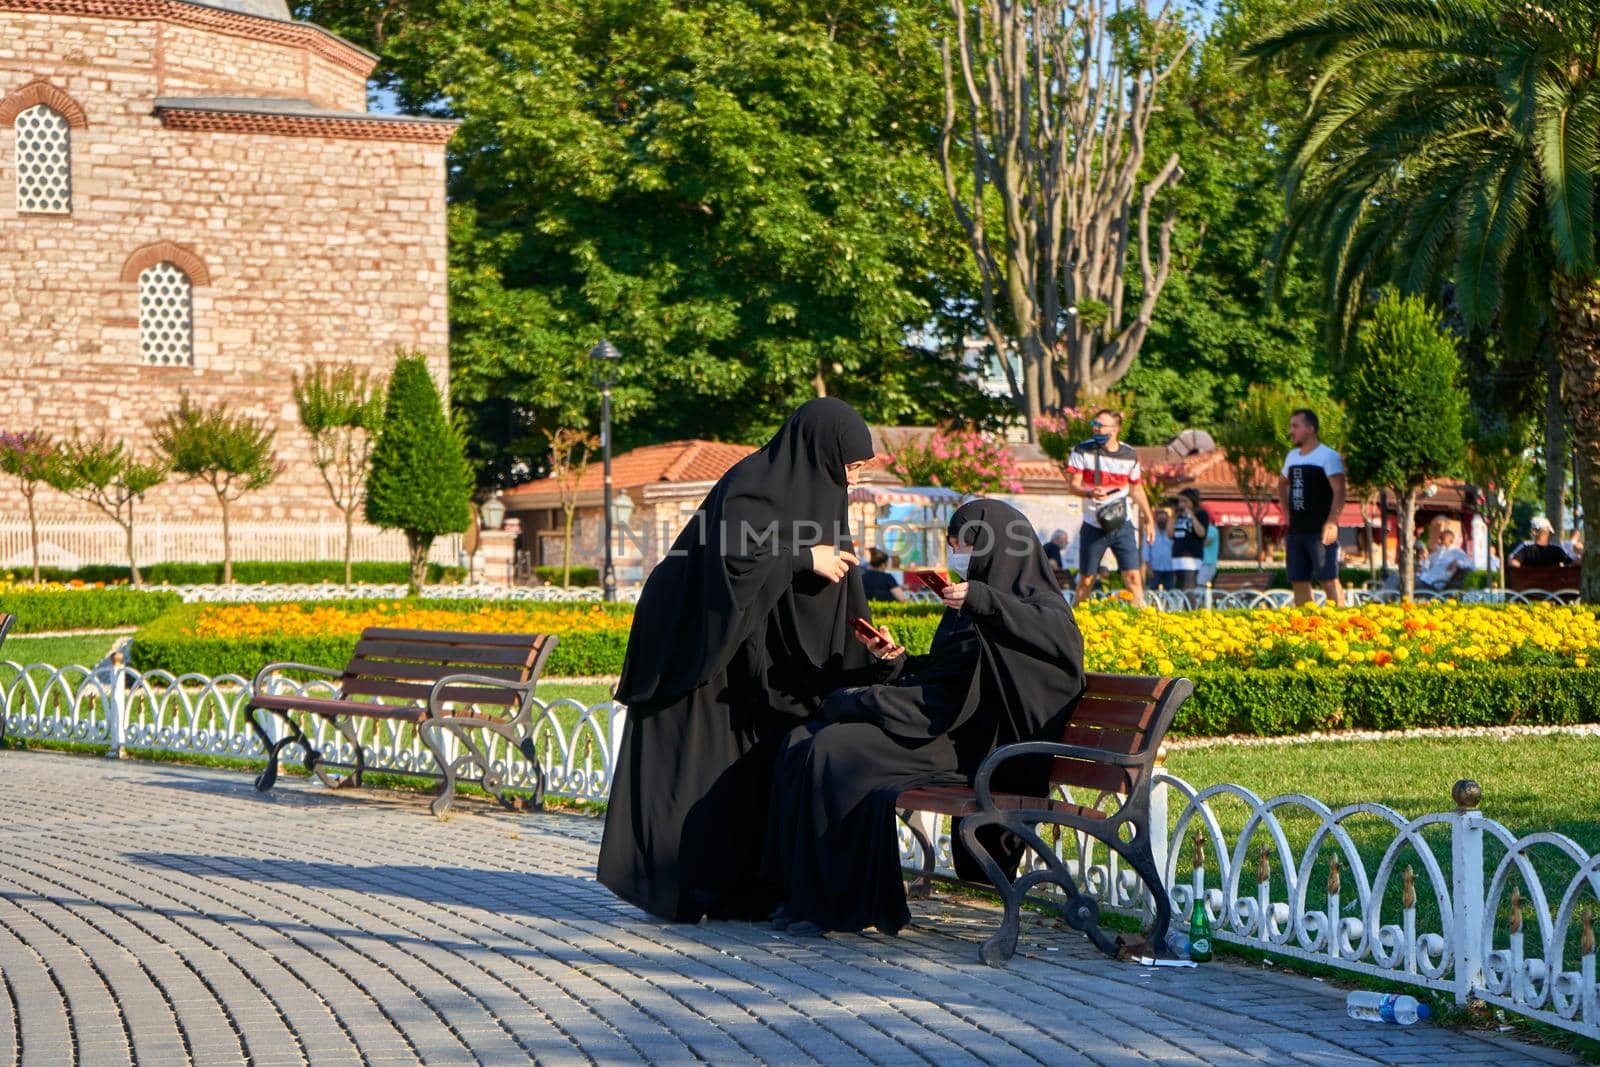 Two muslim women in hijab relaxing on the bench next to Sofia mosque.